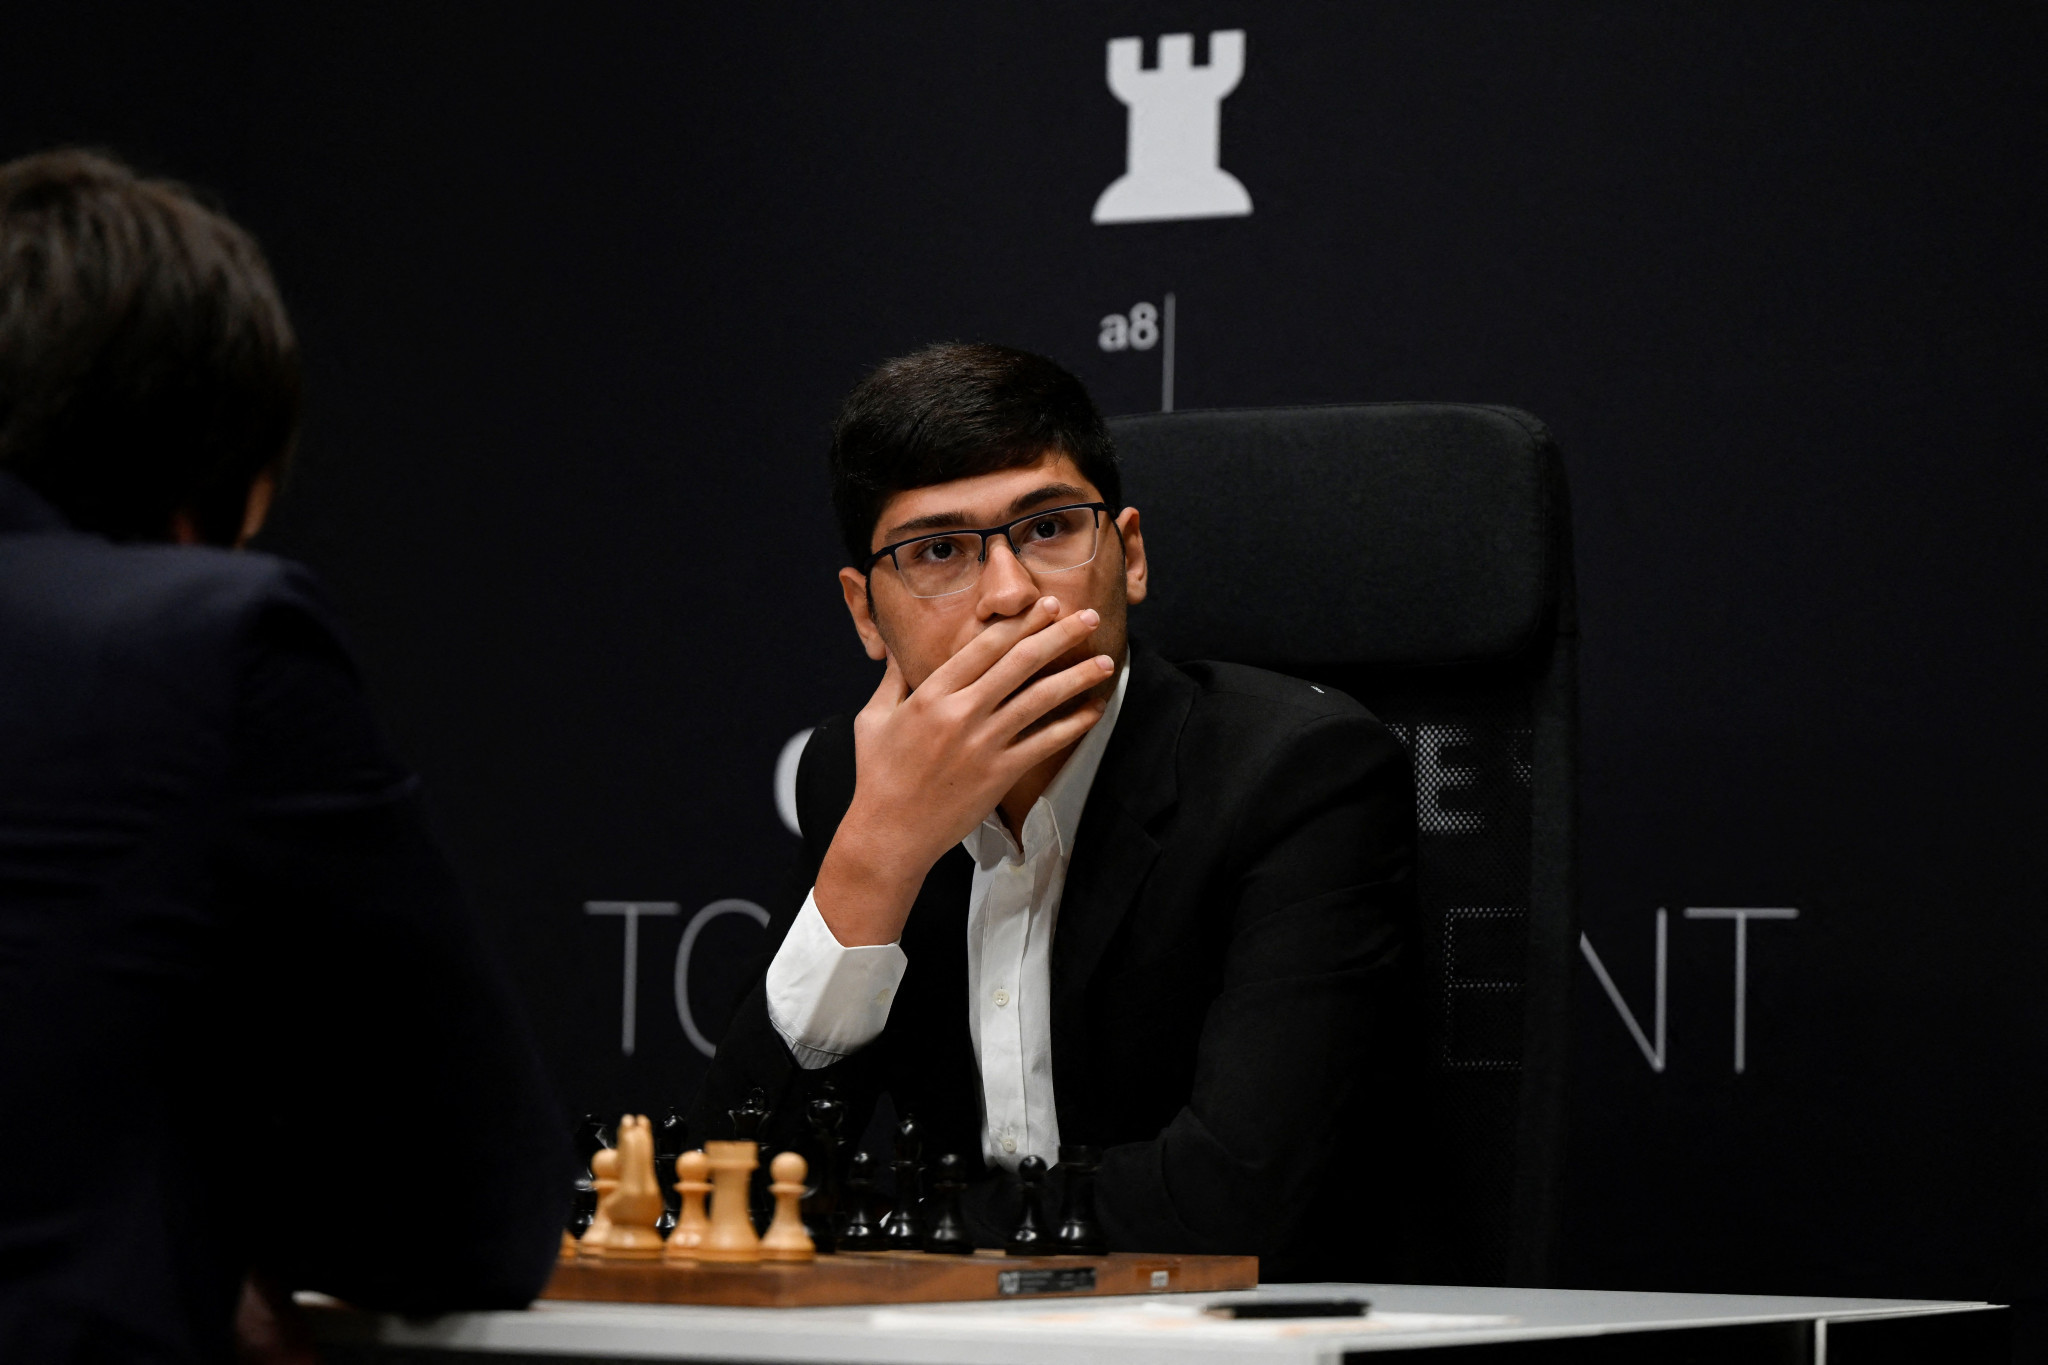 Alireza Firouzja has been named the Grand Chess Tour champion for 2022 ©Getty Images